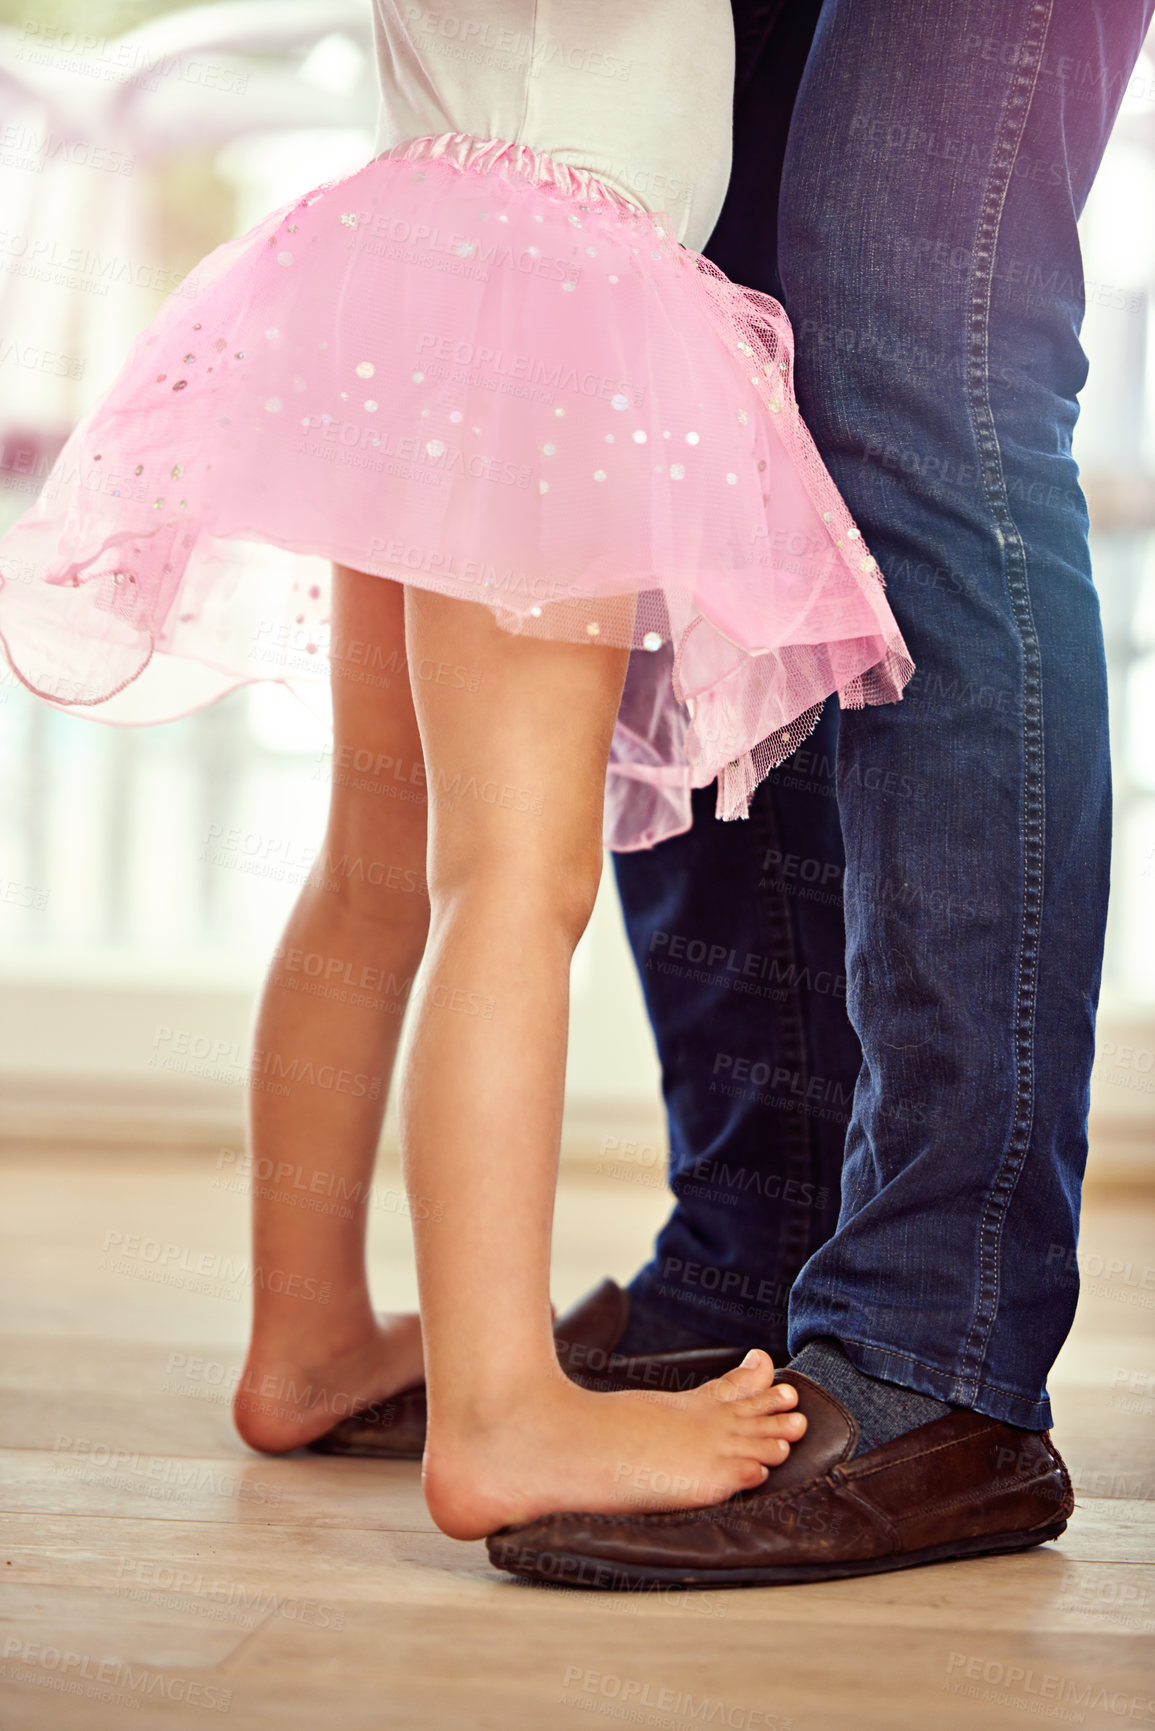 Buy stock photo Legs, feet with father and daughter dance, teaching and learn with music and rhythm at family home. Man, young girl and standing together with activity for bonding, ballet with safety and support